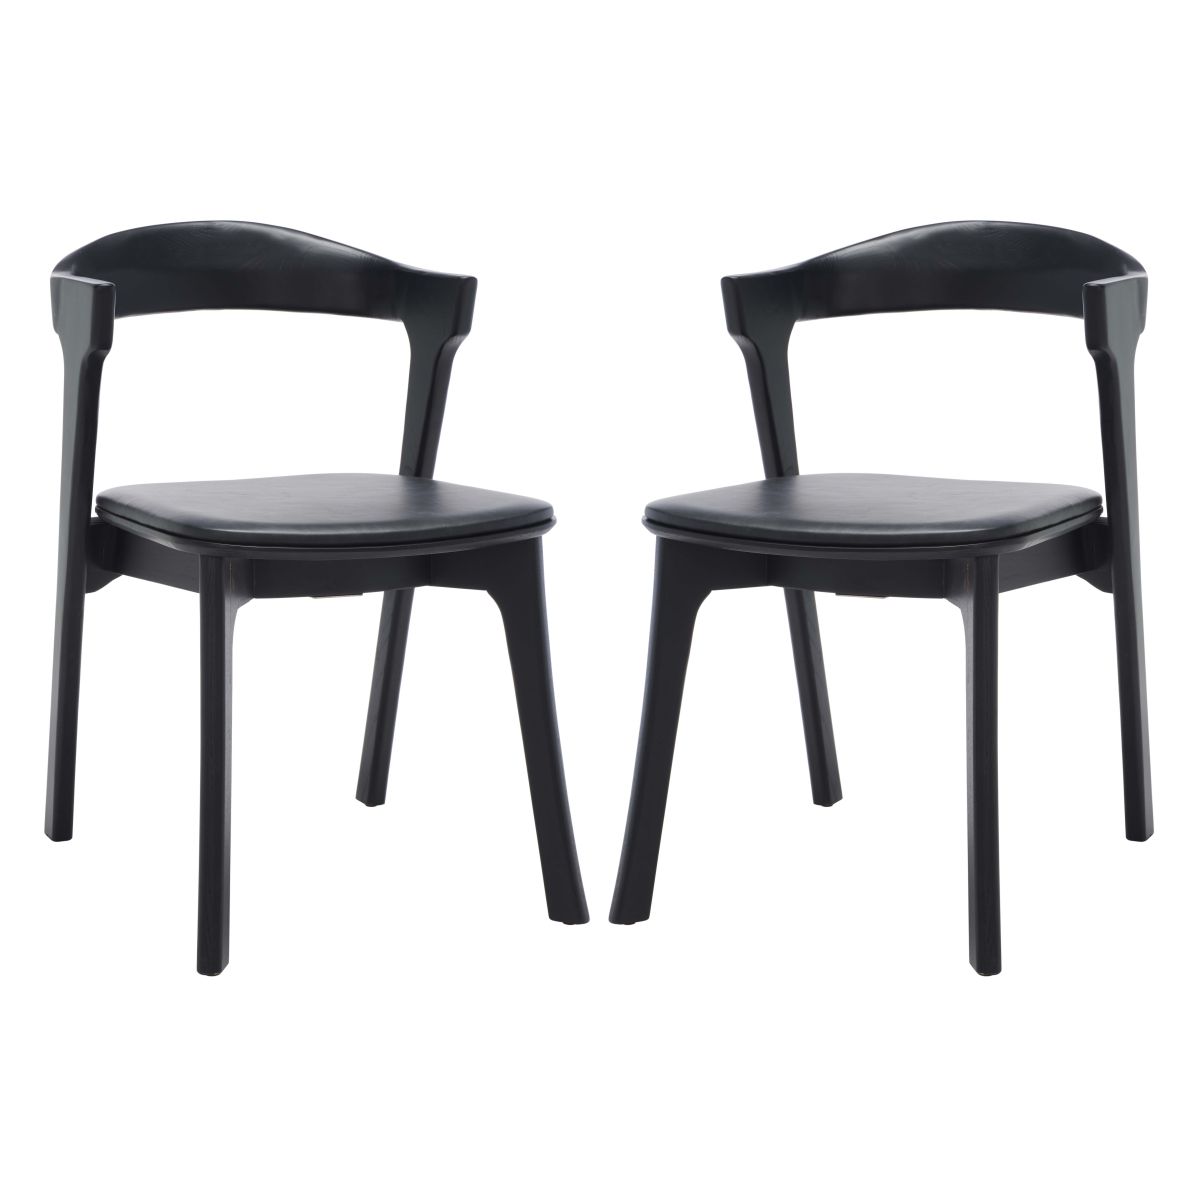 Safavieh Couture Brylie Wood And Leather Dining Chair(Set of 2) , SFV4126